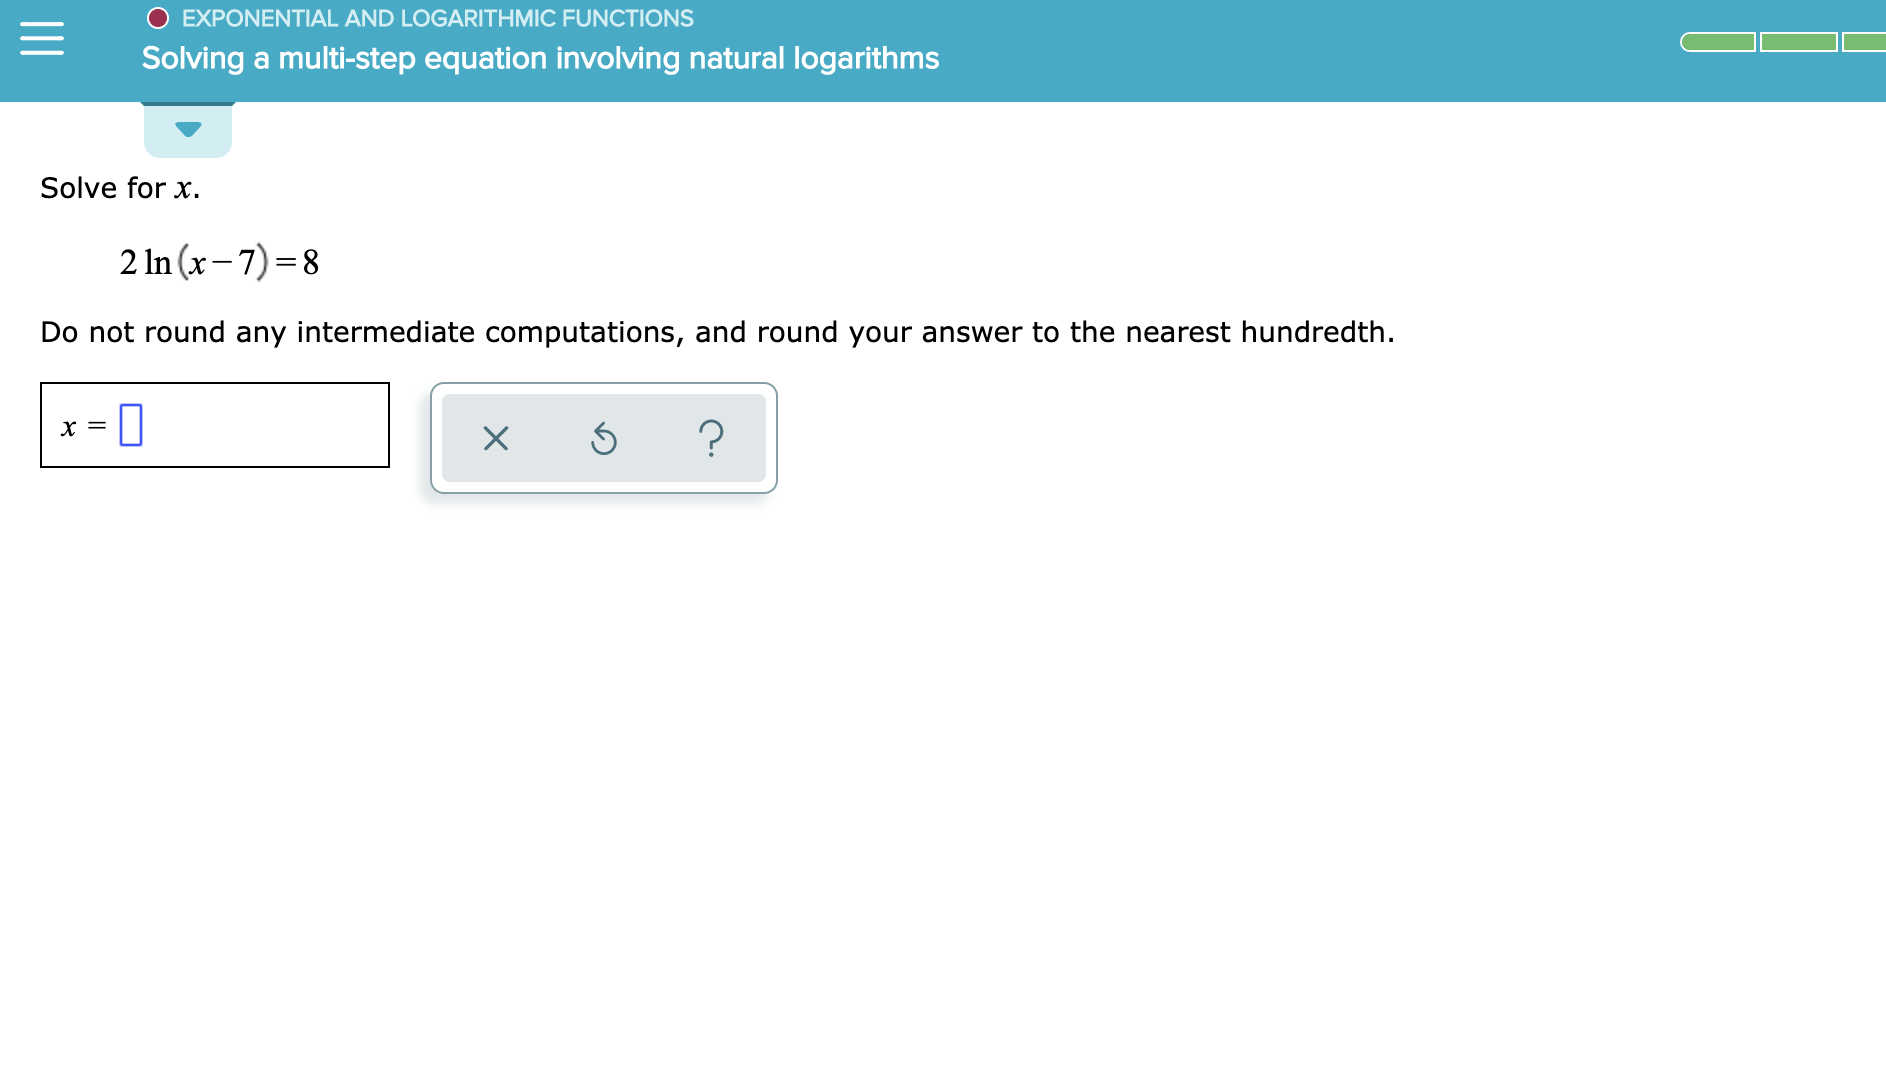 EXPONENTIAL AND LOGARITHMIC FUNCTIONS
Solving a multi-step equation involving natural logarithms
Solve for x
2 In (x-7) 8
Do not round any intermediate computations, and round your answer to the nearest hundredth
?
X
X
